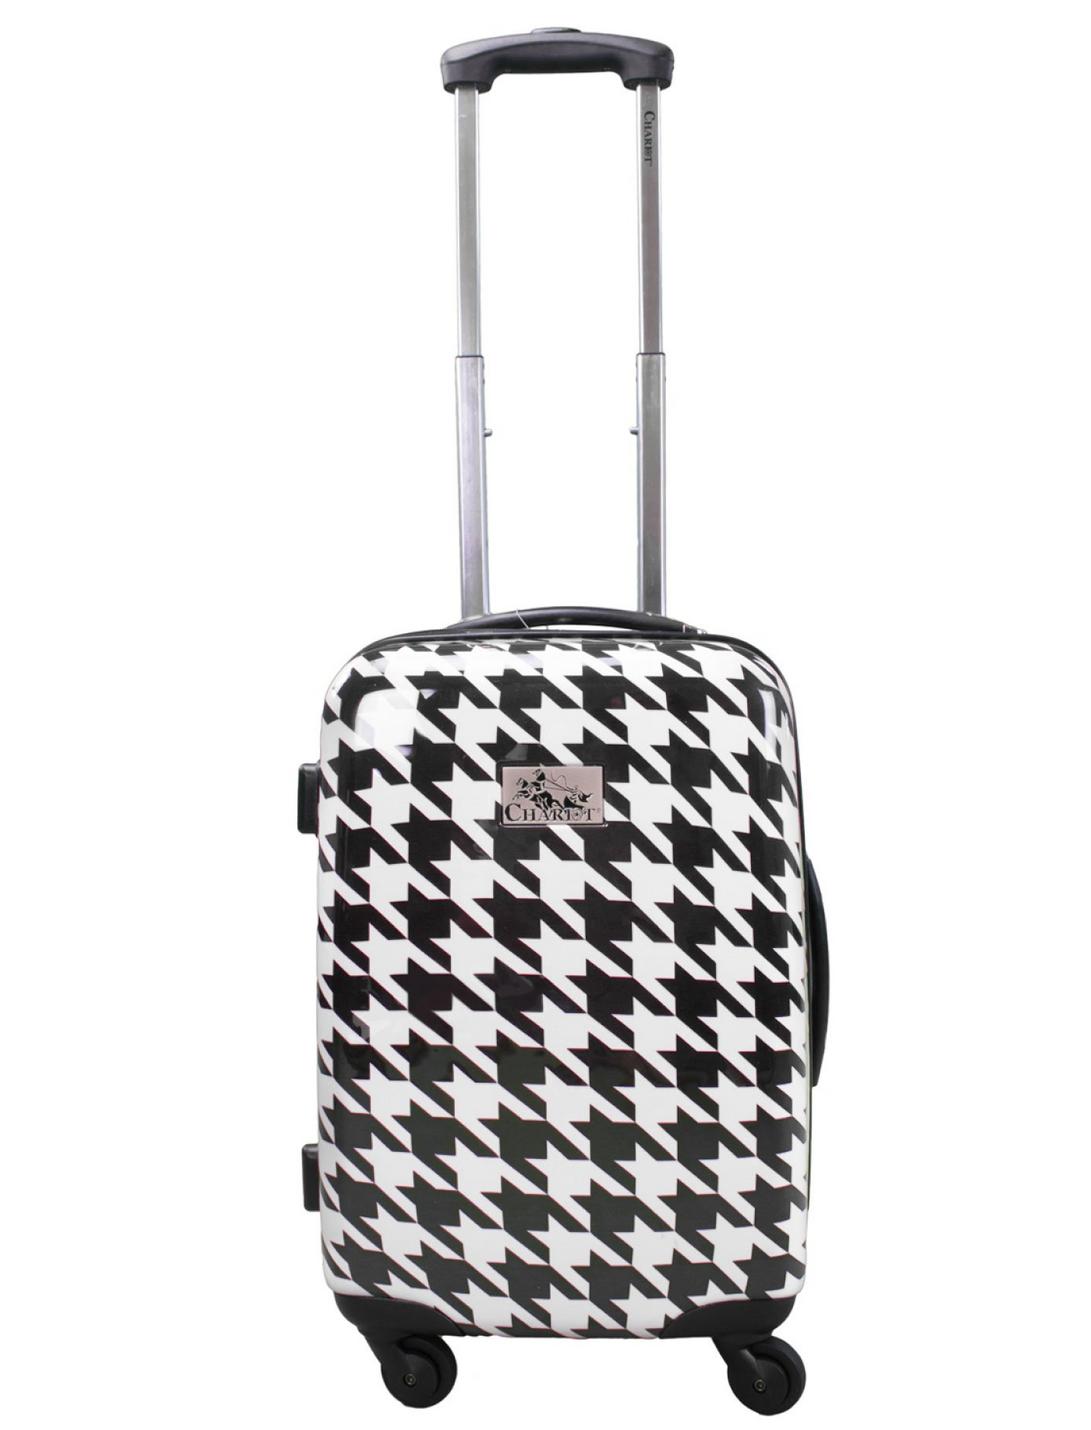 Hard Sided Carry On White and Black Houndstooth Luggage, , hi-res